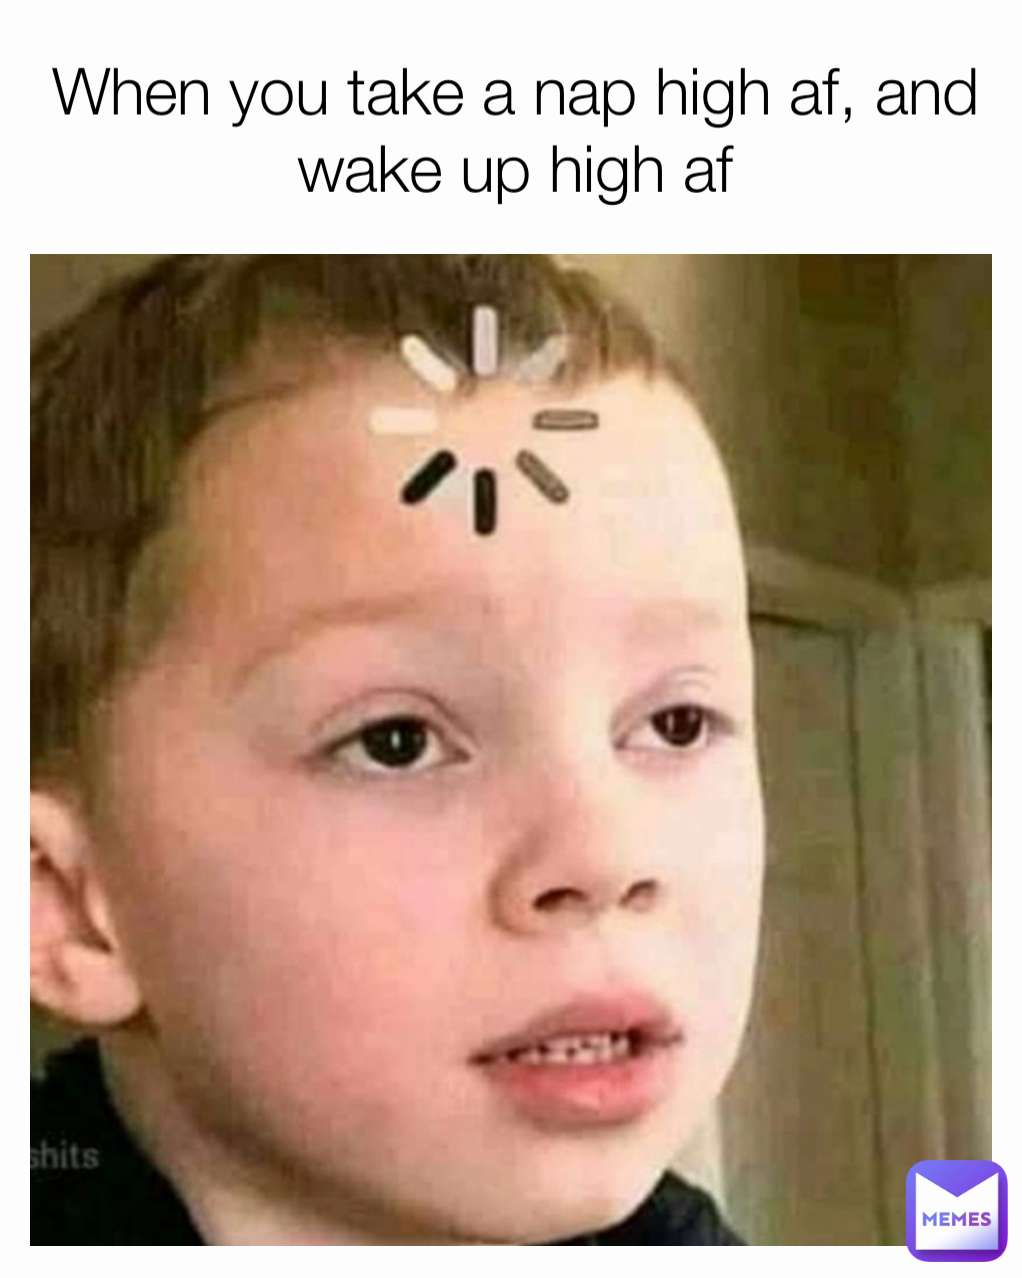 When you take a nap high af, and wake up high af